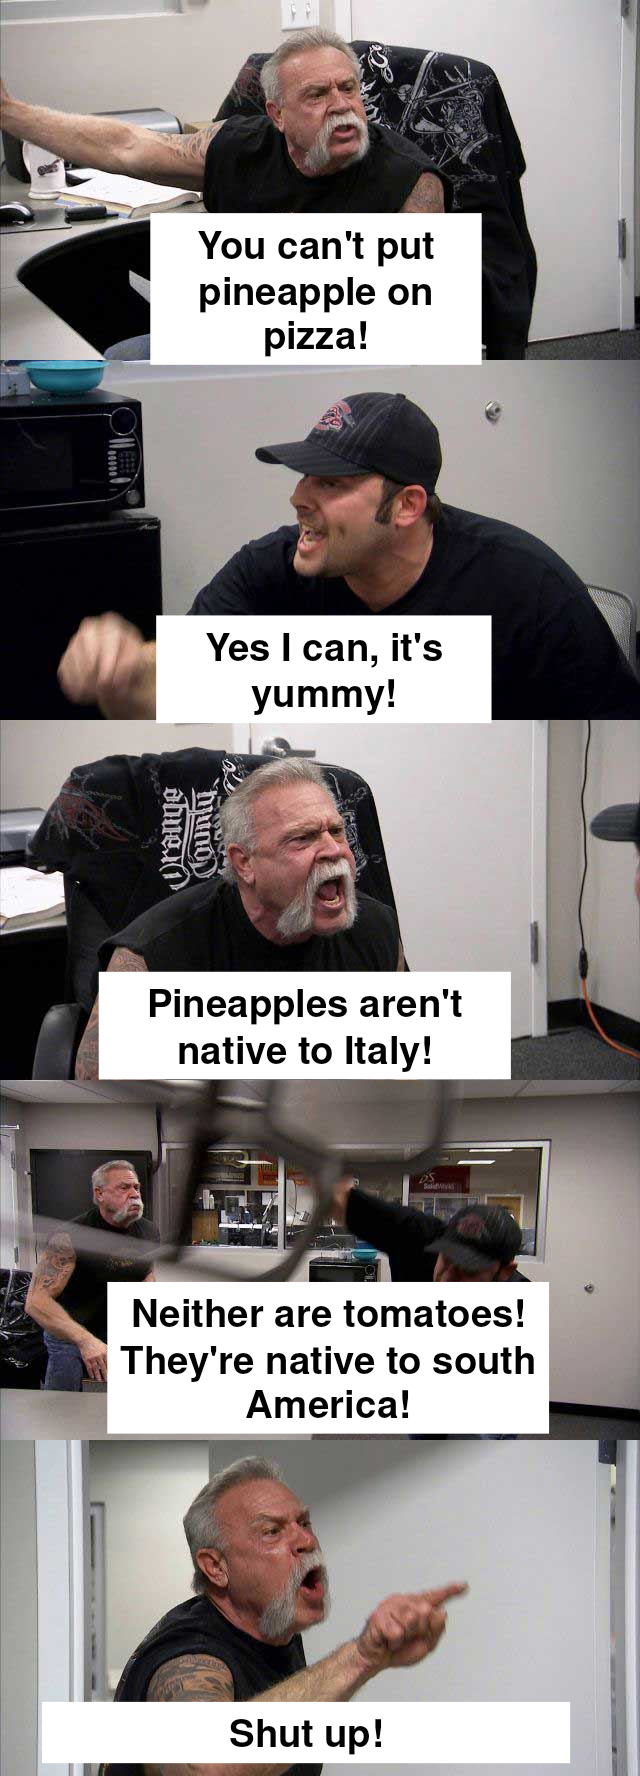 dank memes - angle - abue. You can't put pineapple on pizza! Yes I can, yummy! County it's Pineapples aren't native to Italy! Shut up! Da Neither are tomatoes! They're native to south America!